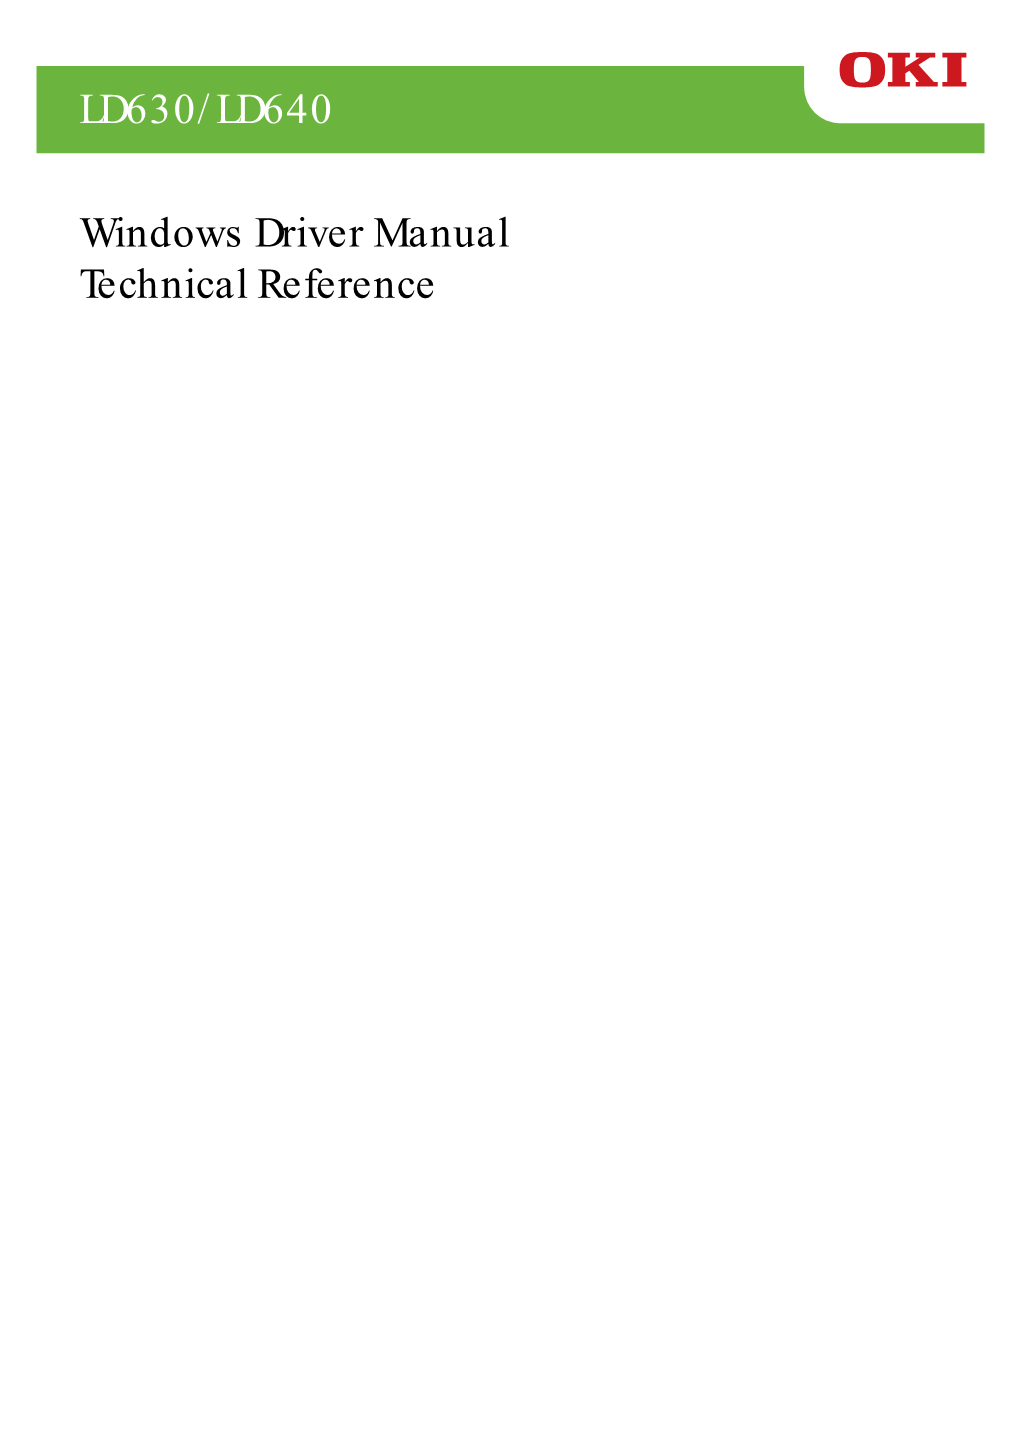 LD630/LD640 Windows Driver Manual Technical Reference